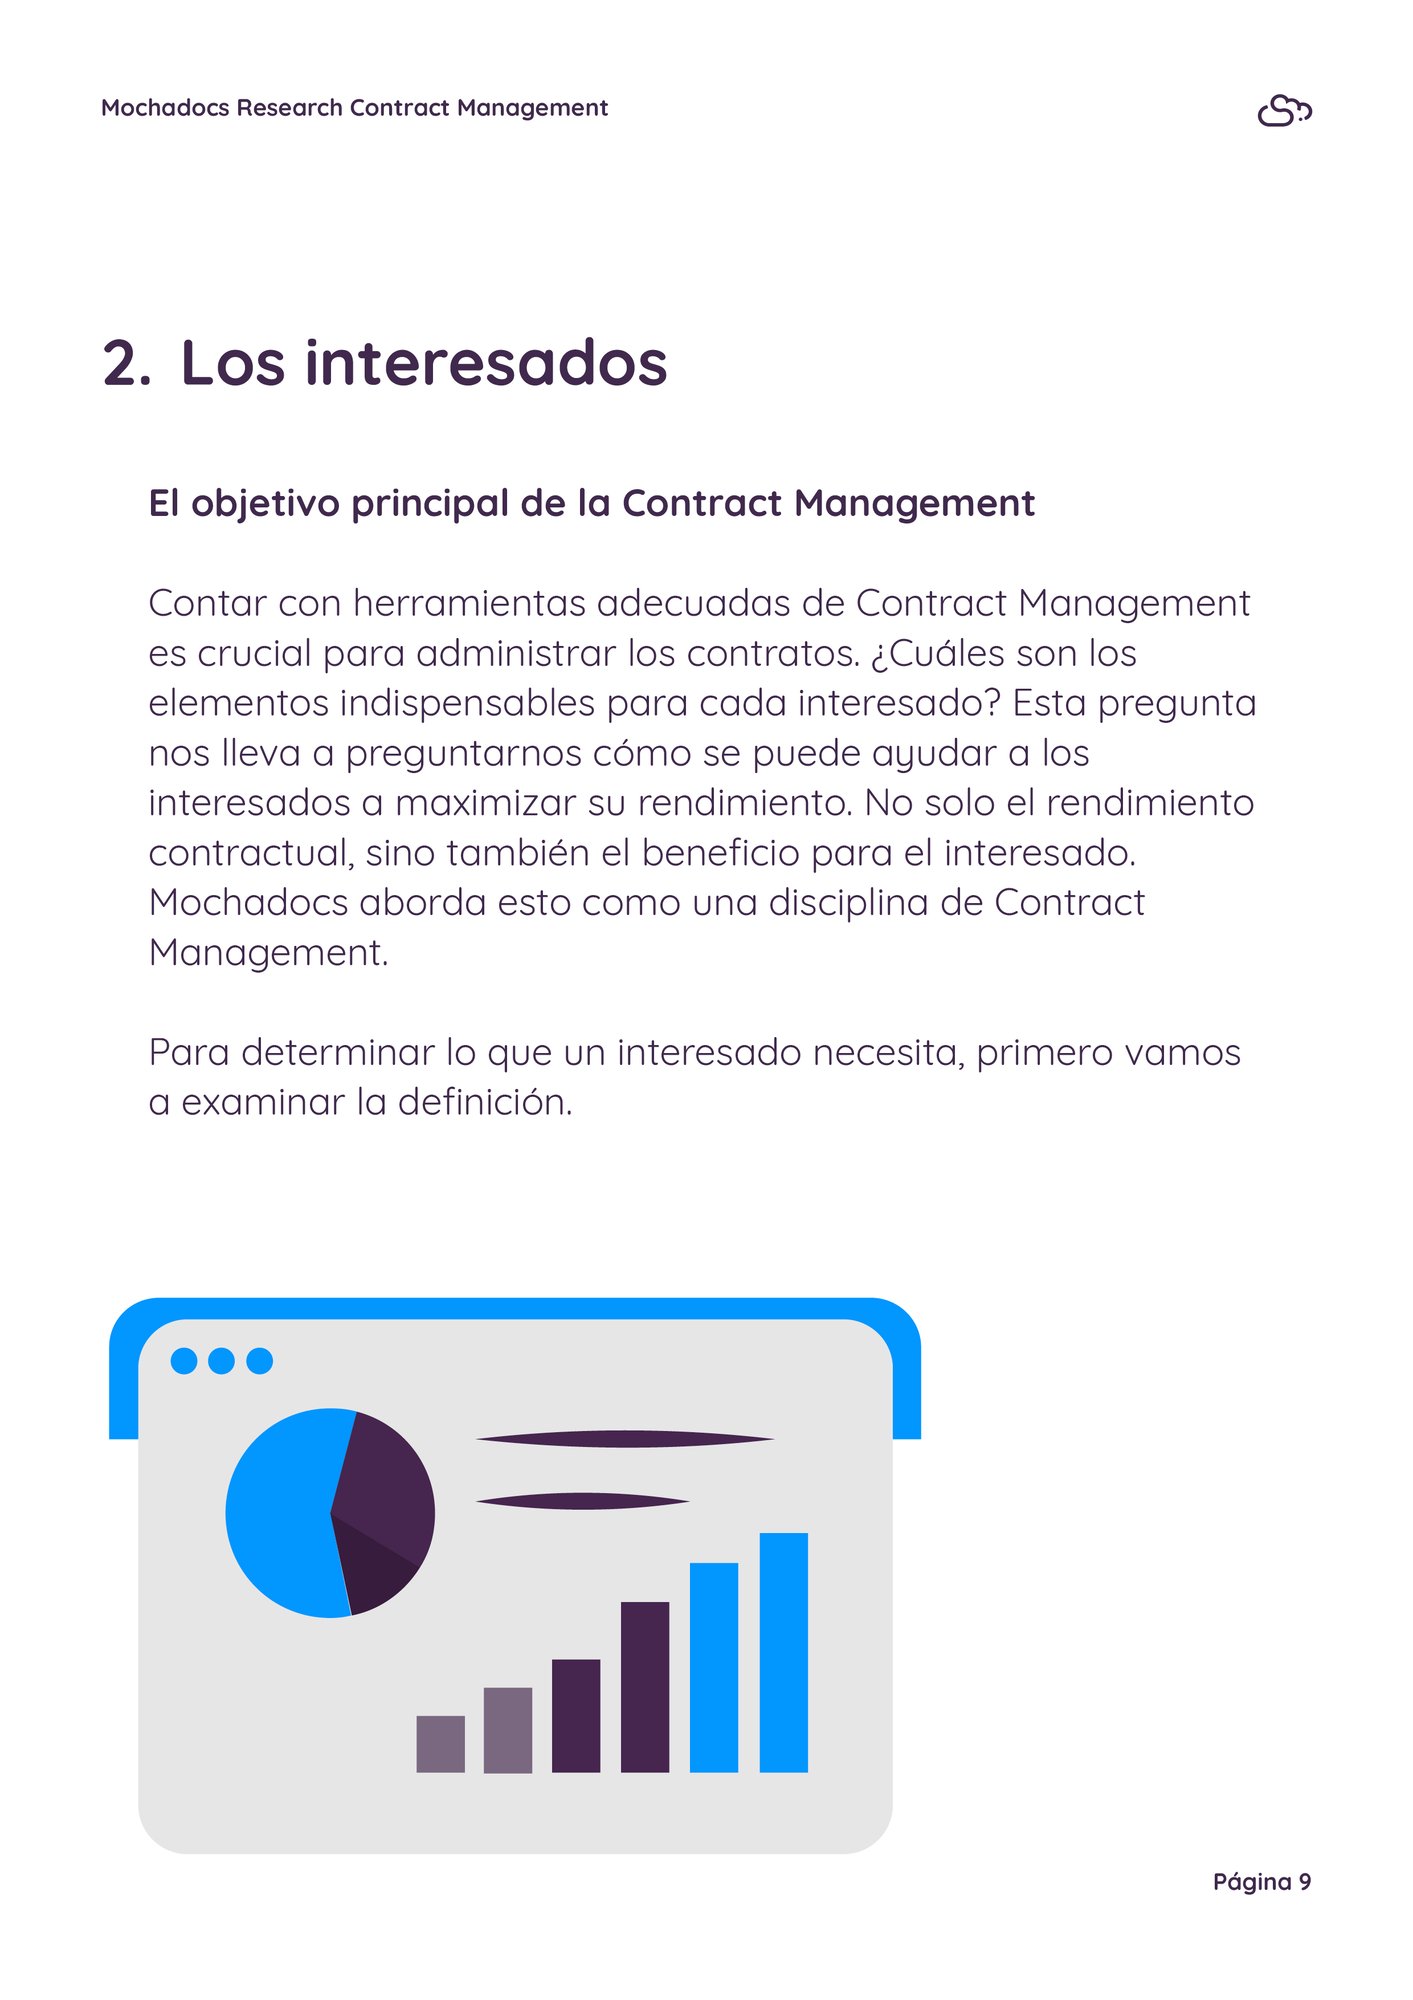 ES - The Contract Management Stakeholder9